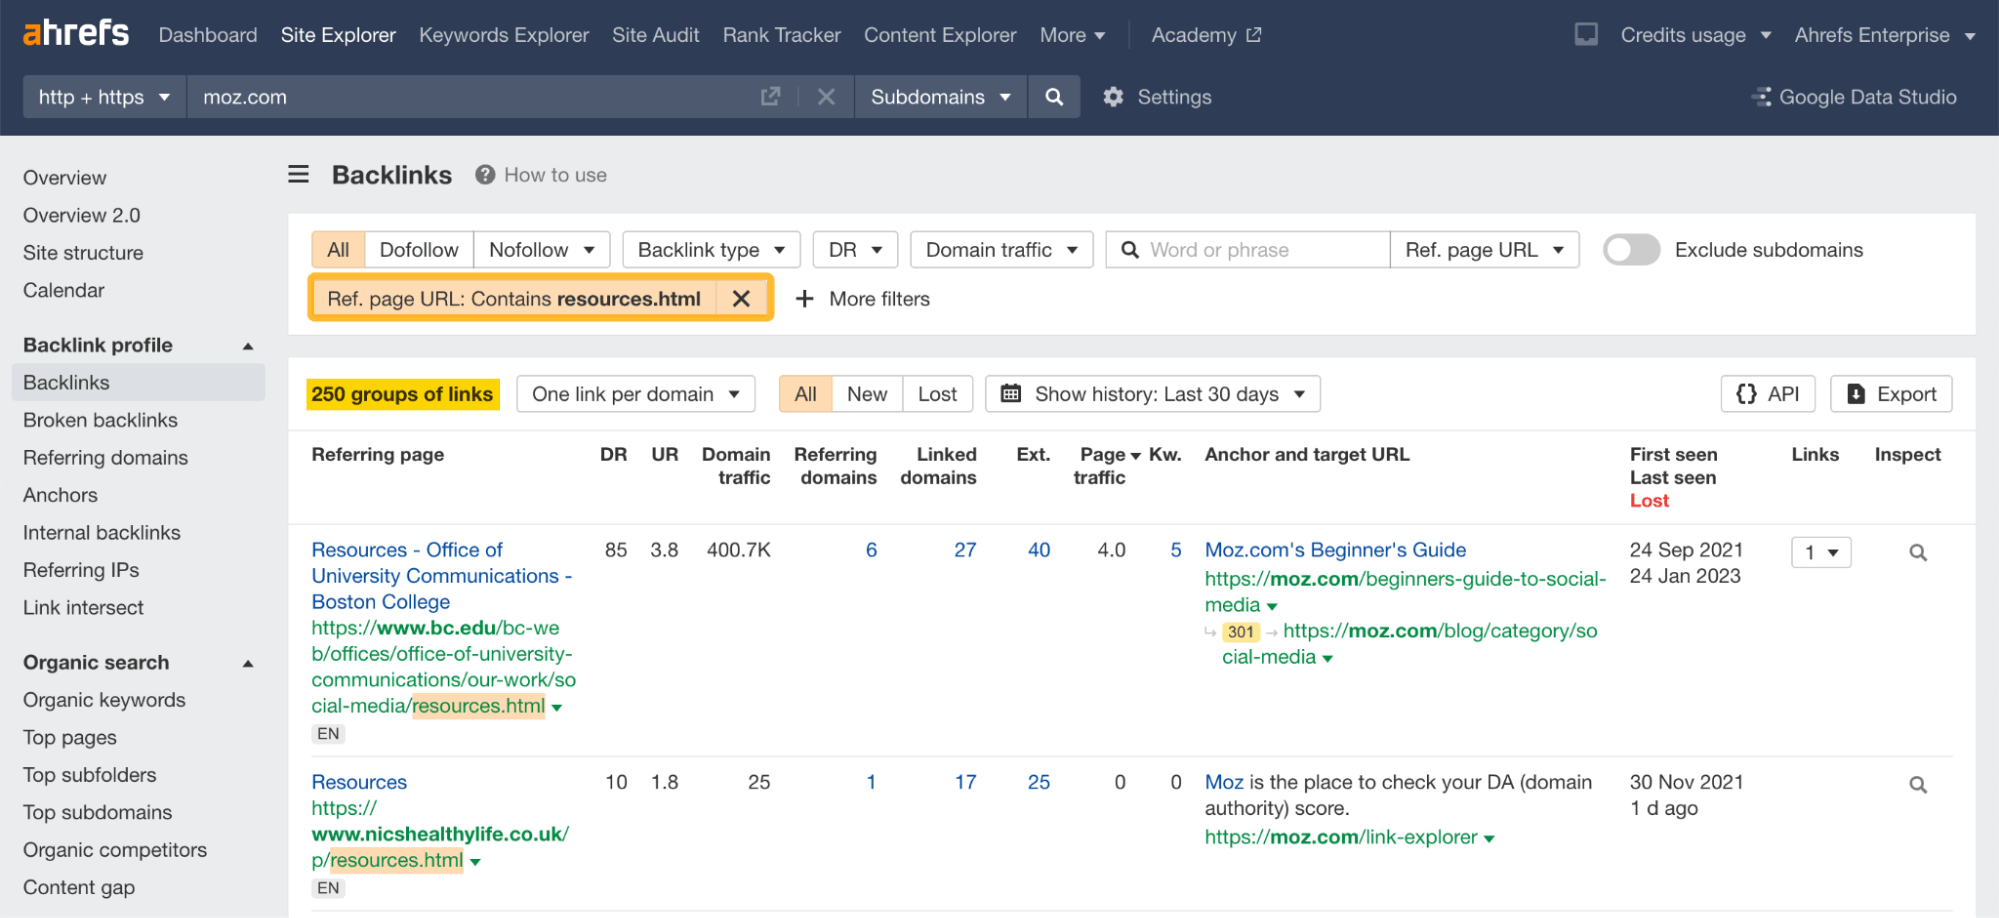 Backlinks report with a "Referring page URL" filter applied, via Ahrefs' Site Explorer